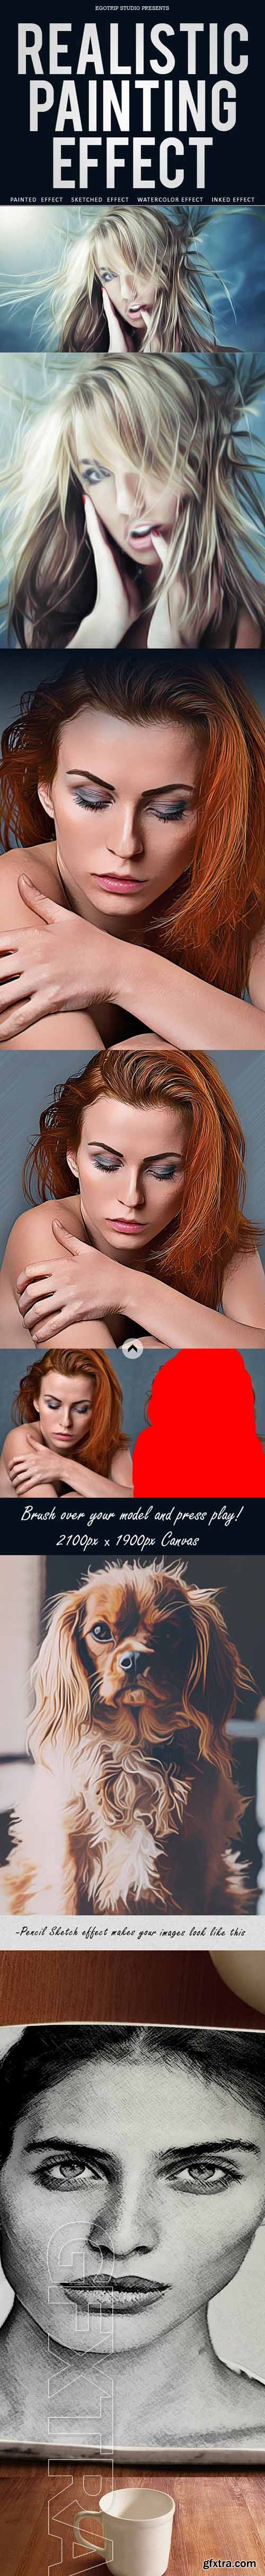 GraphicRiver - Realistic Painting Effect 20479818